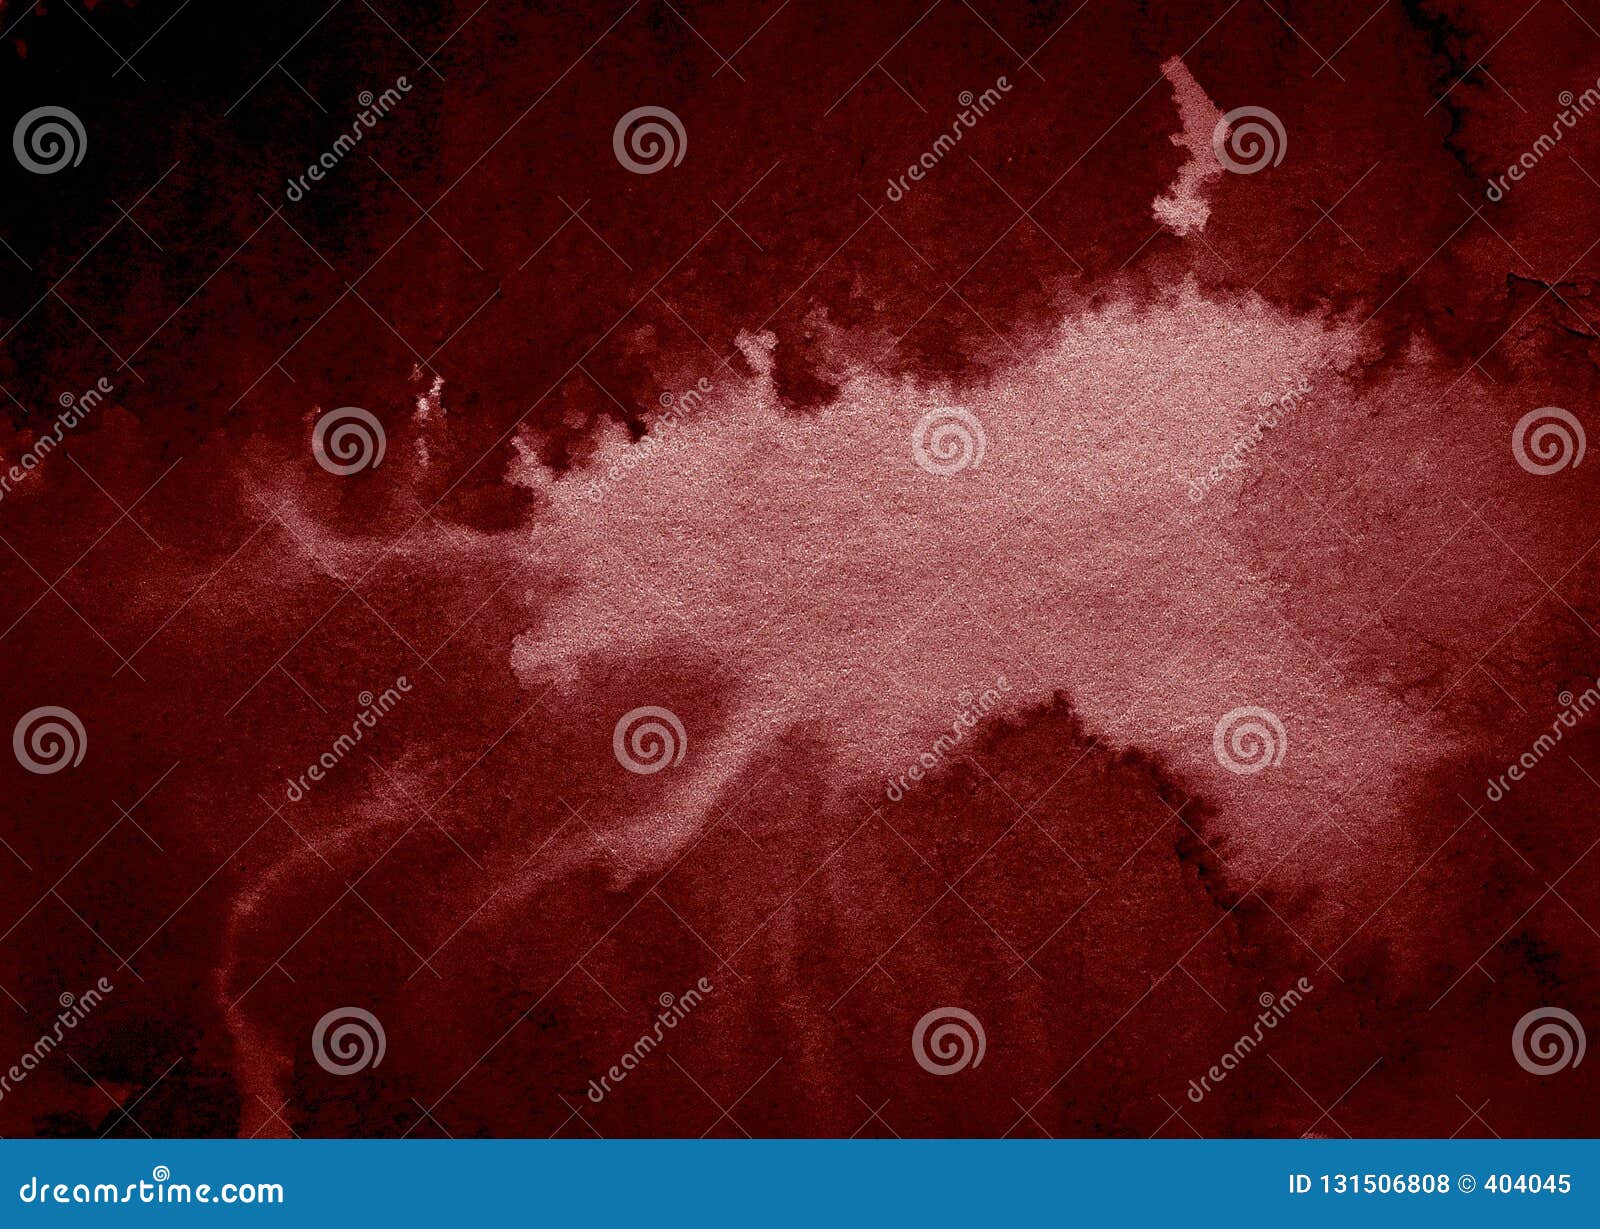 dark red watercolor abstract background, stain, splash of paint, stain, divorce. alarming, blood red gradient